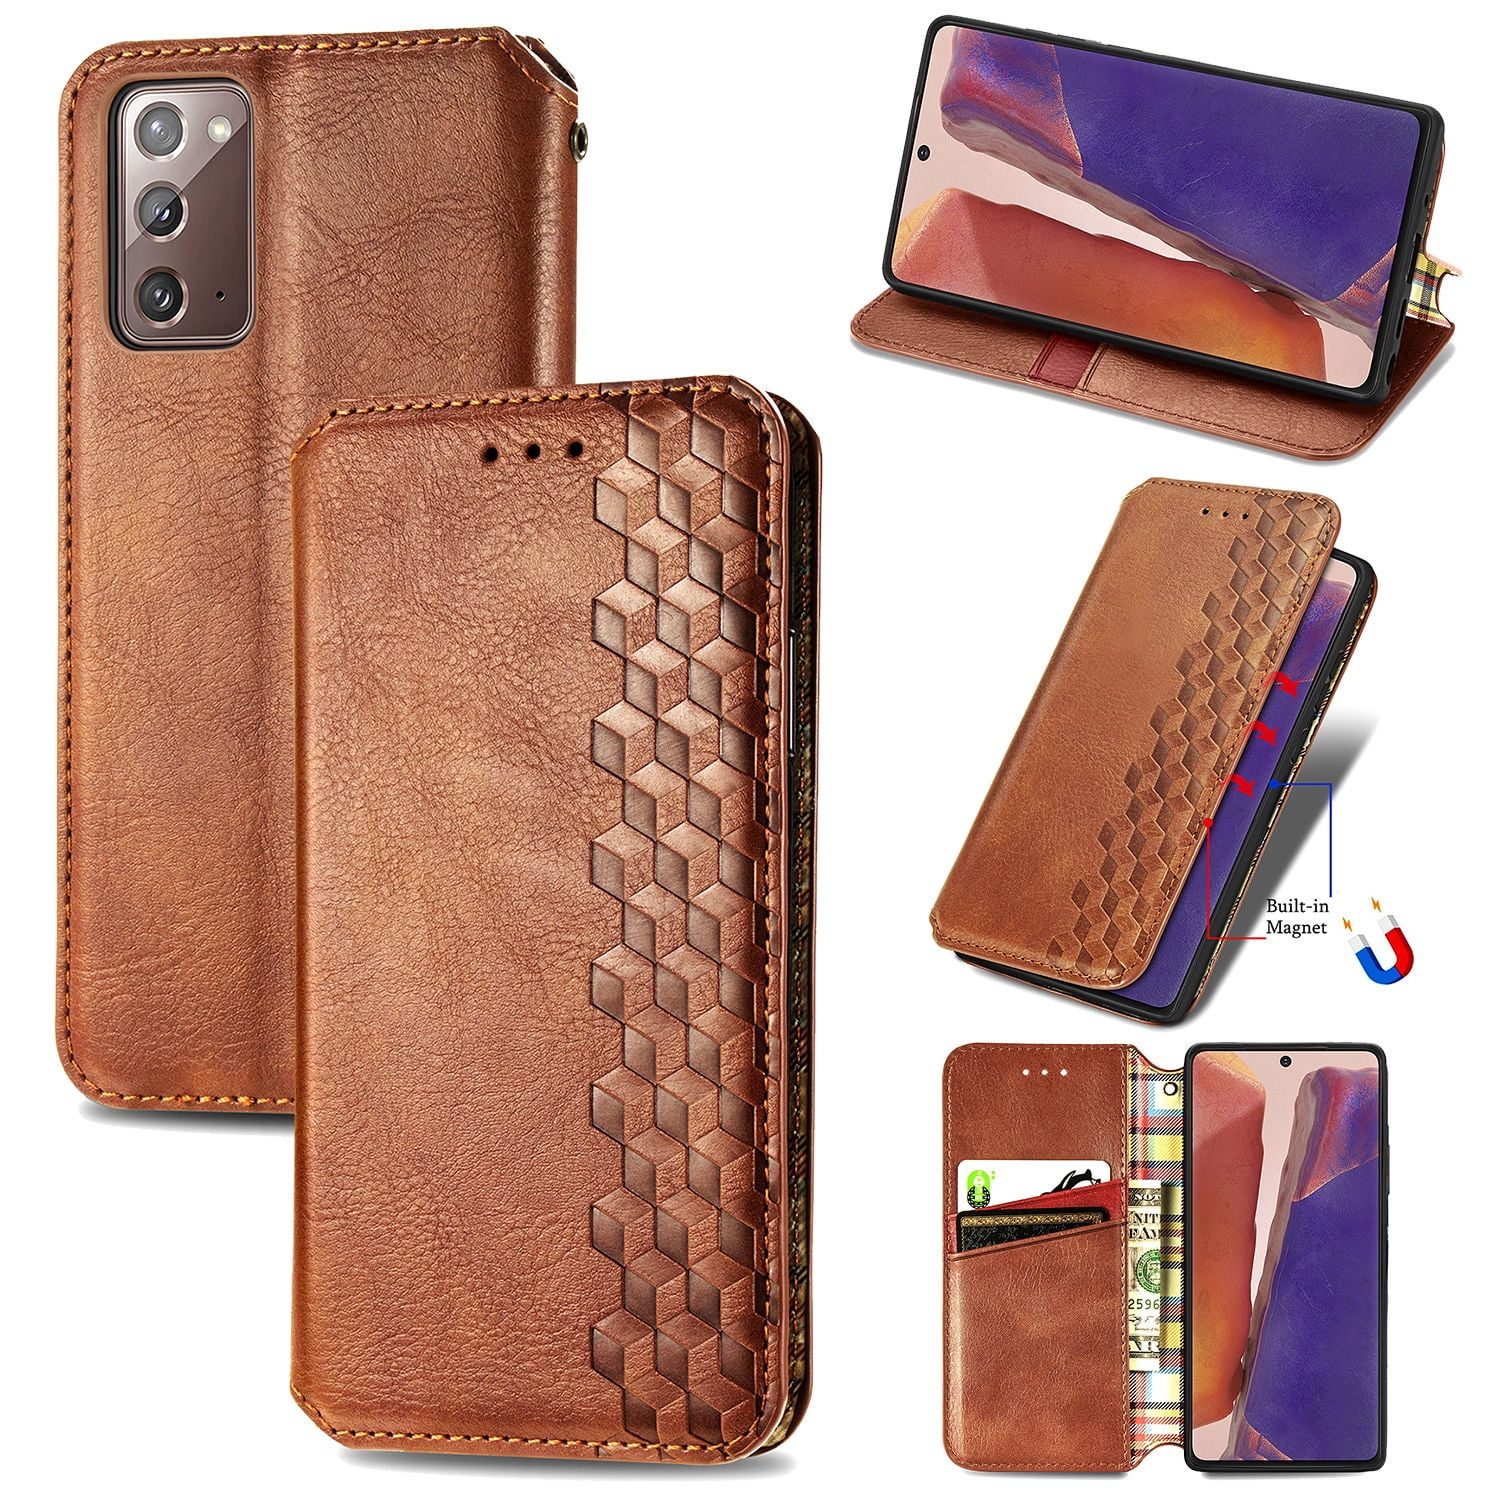 Mandala Galaxy Luxury PU Leather Case with Folio Flip Stand Feature with Wrist Strap UNC Pro for T-Mobile REVVL V Plus 5G Wallet Pouch Phone Case for Women Girls 